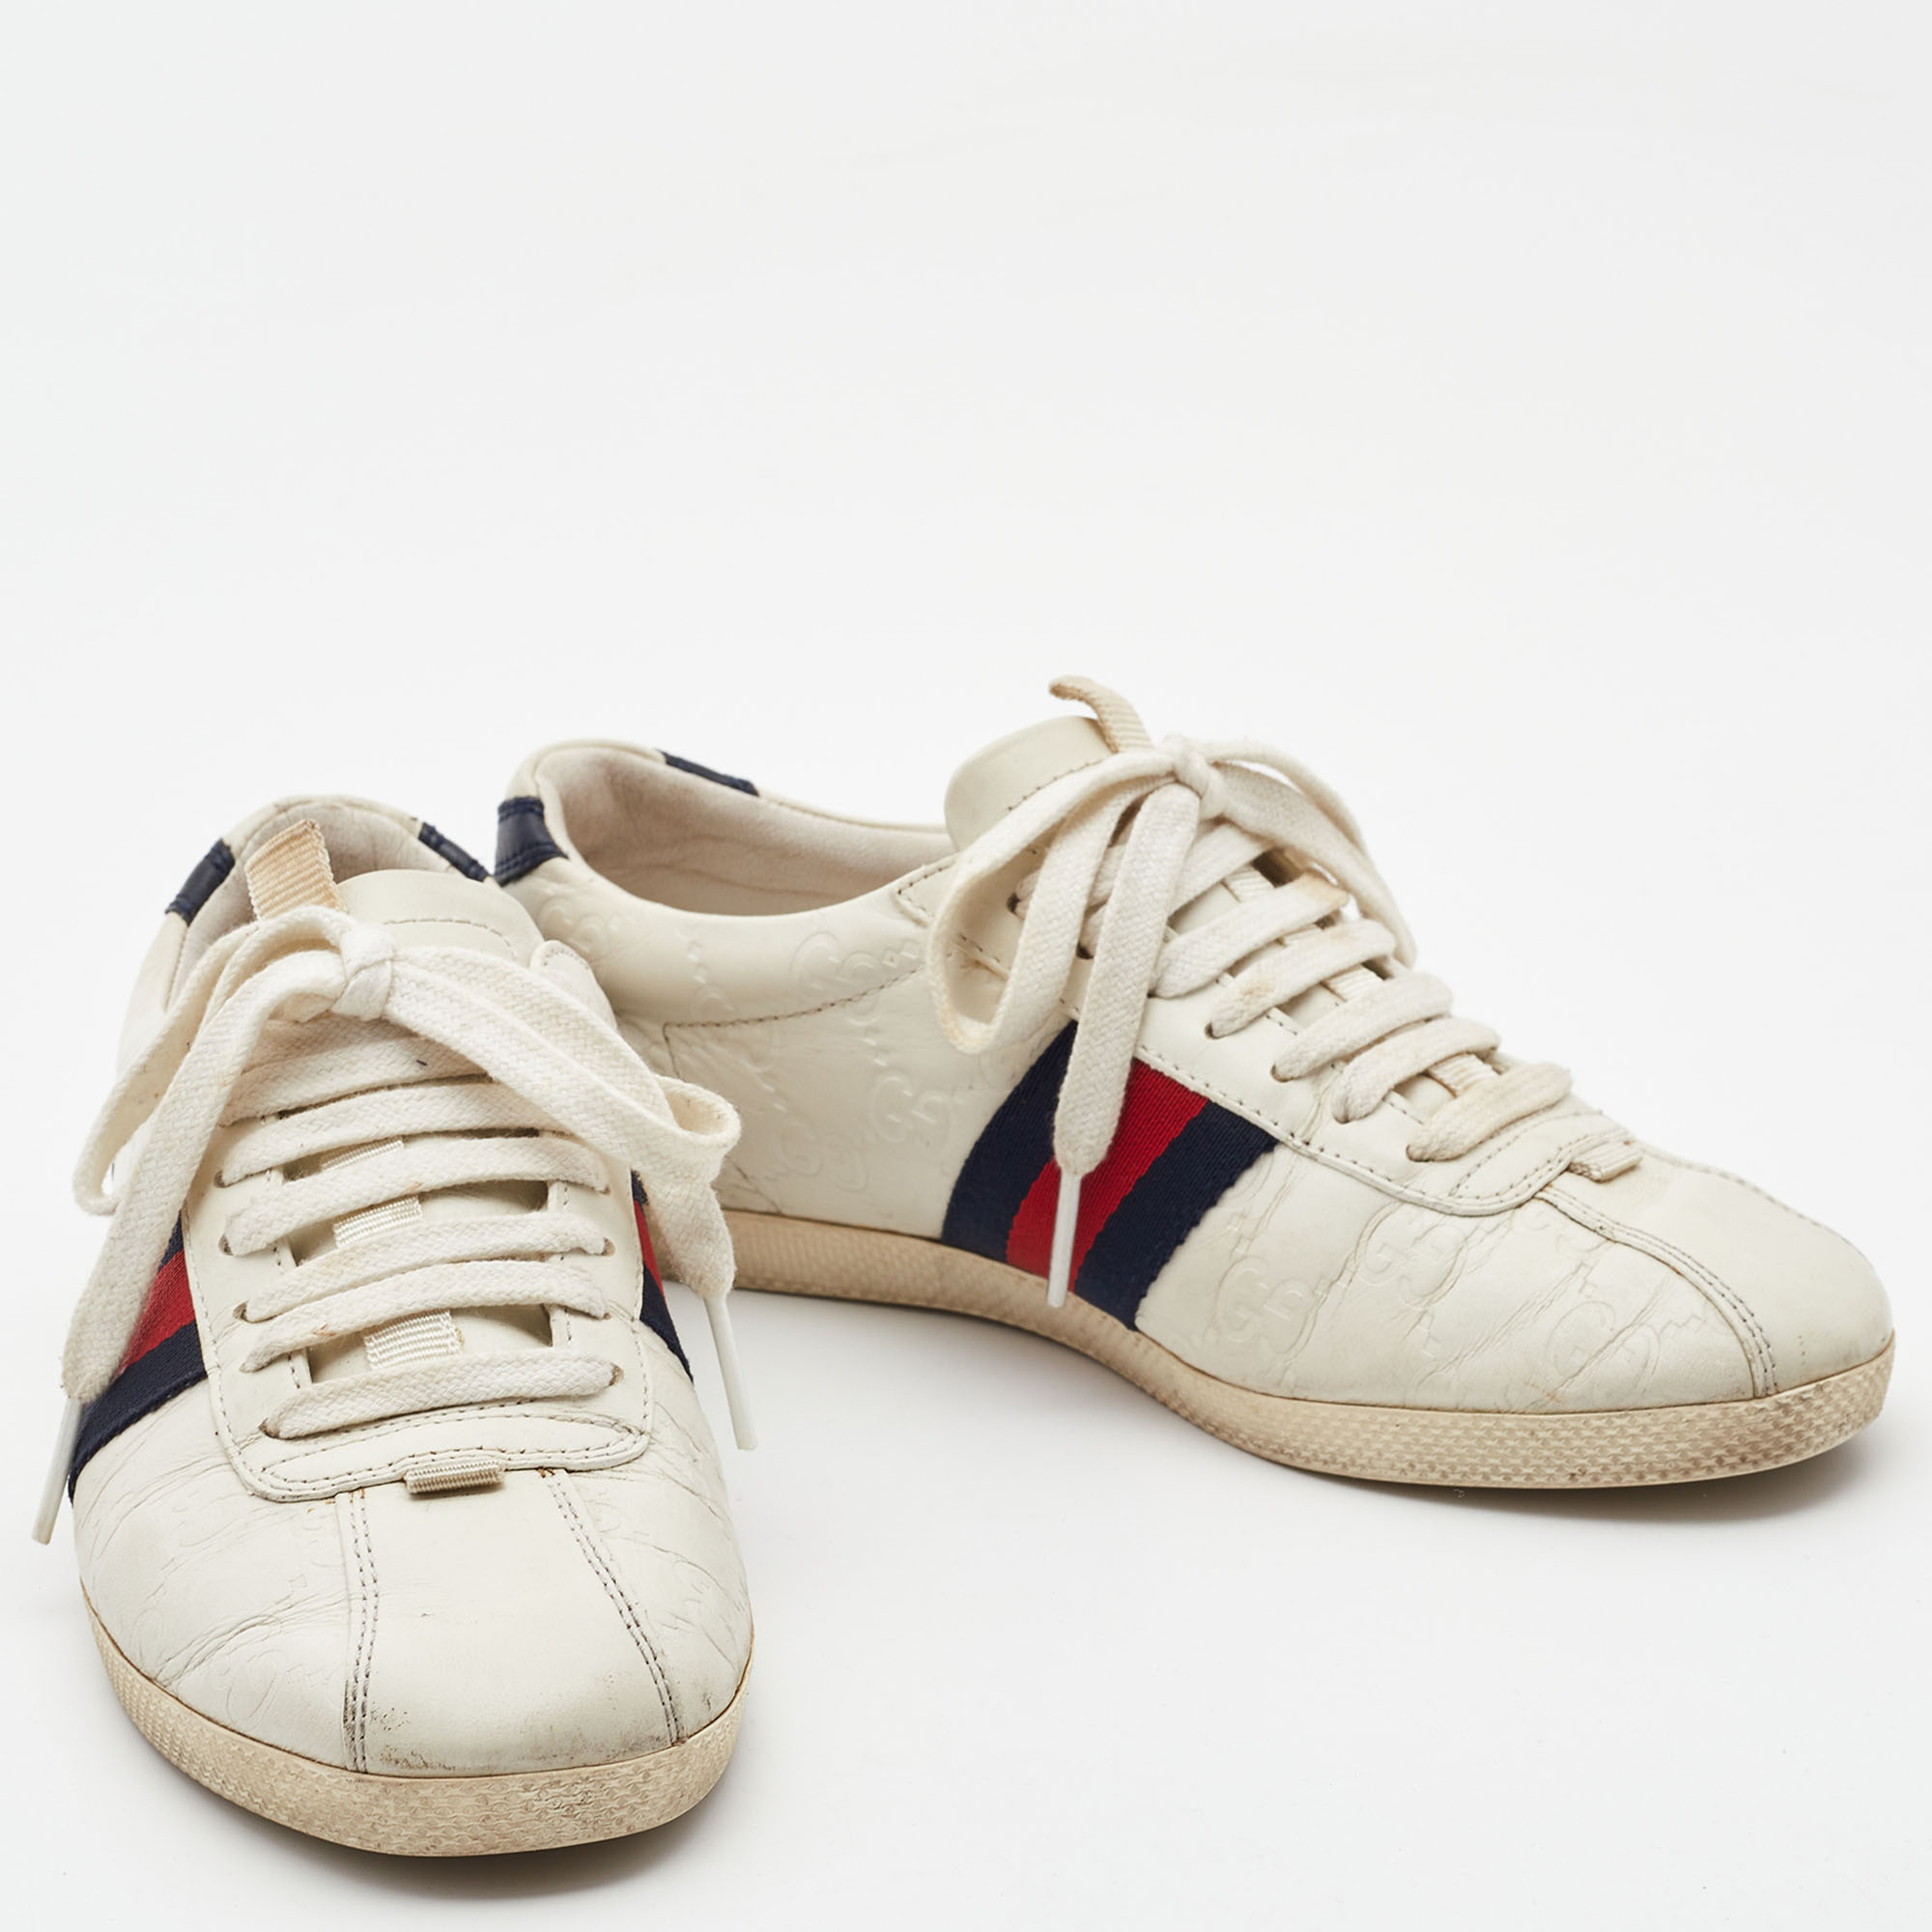 Gucci White Guccissima Leather Web Low Top Sneakers Size 35